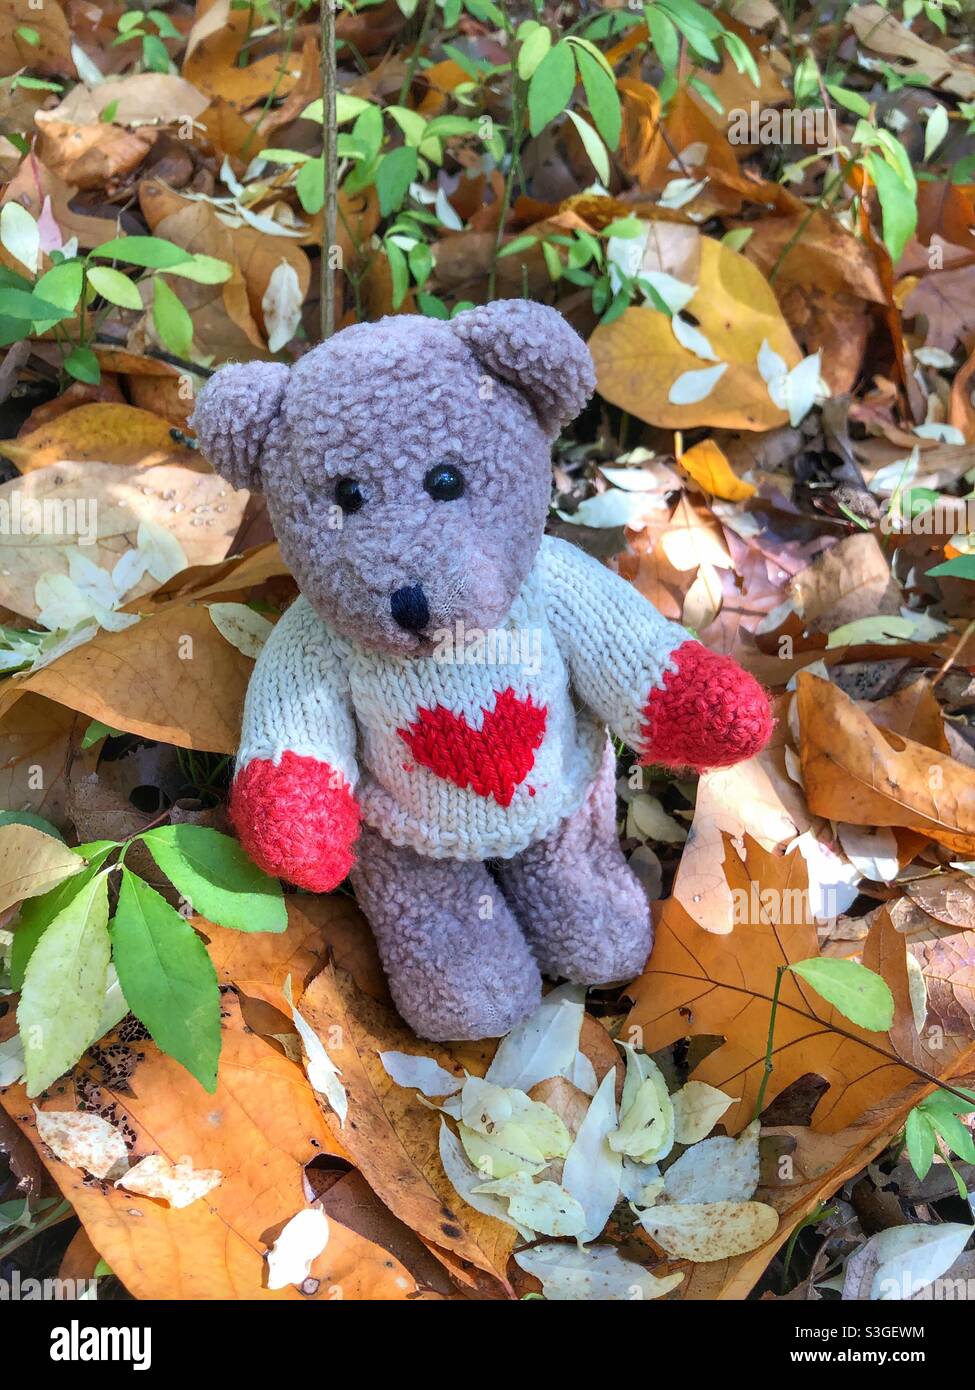 A cute small teddy bear wearing a sweater with a red heart sitting in a pile of autumn leaves. Stock Photo